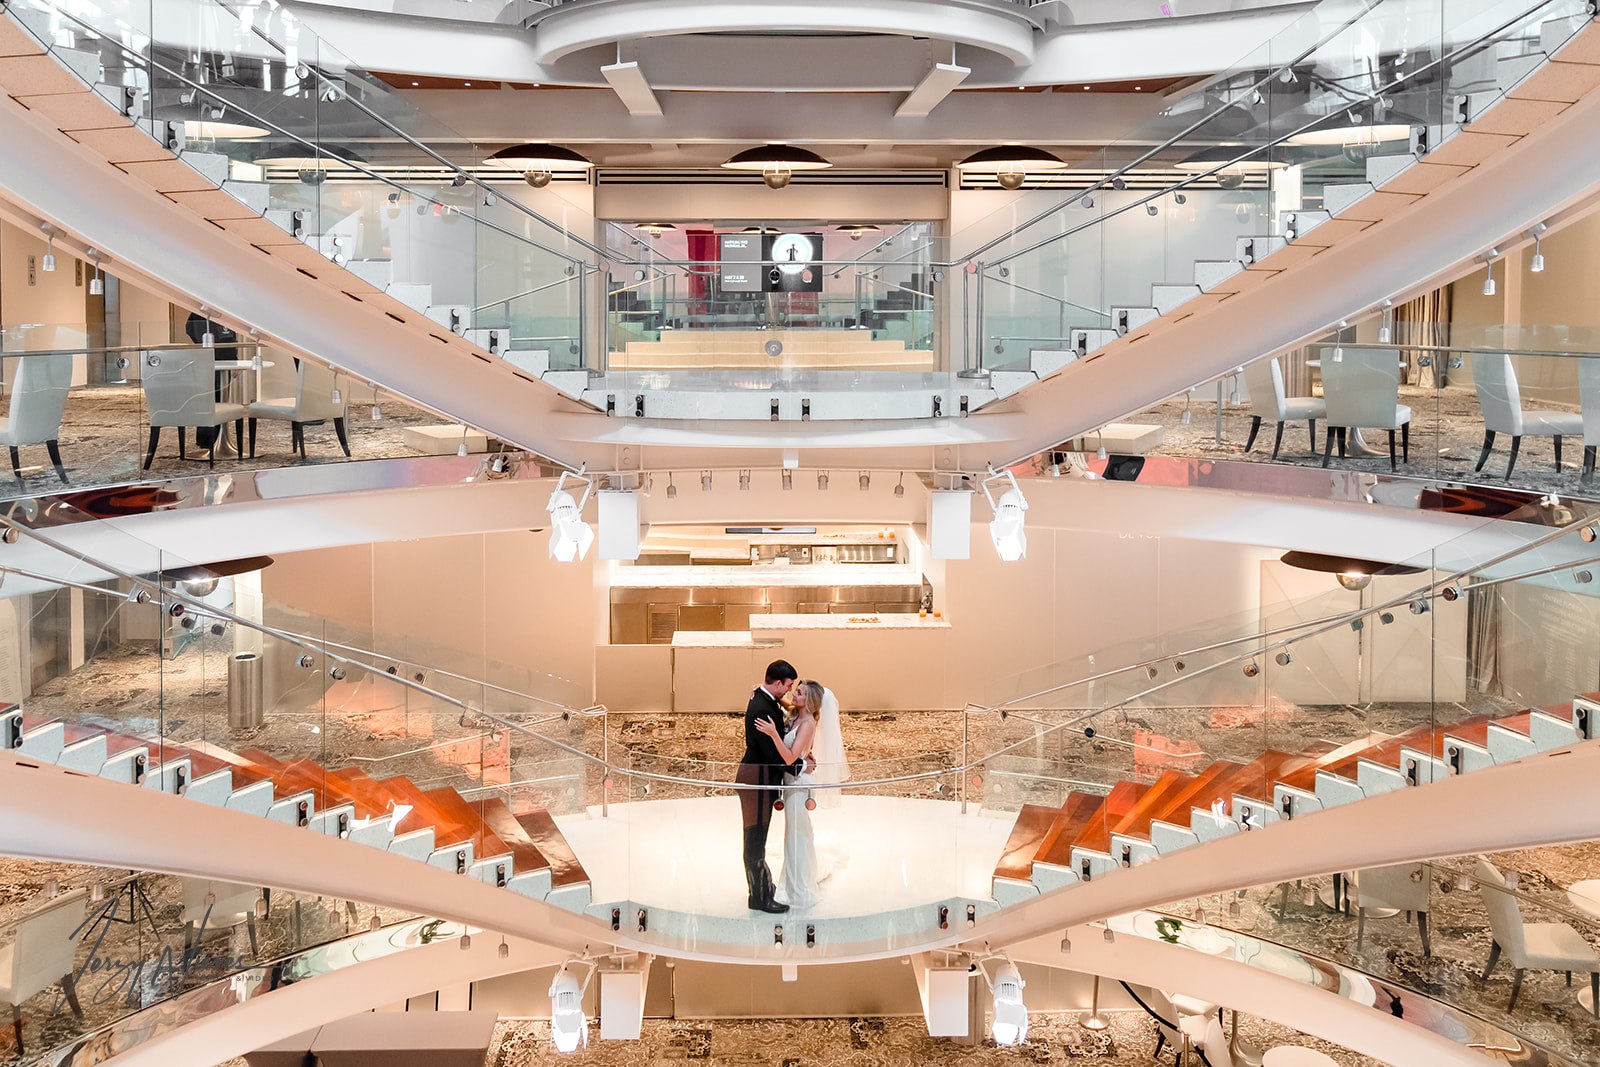 Bride and groom Brittany and Nathan embracing on the central staircase at Dr. Phillips Center for Performing Arts, showcasing the building's architecture and their love.